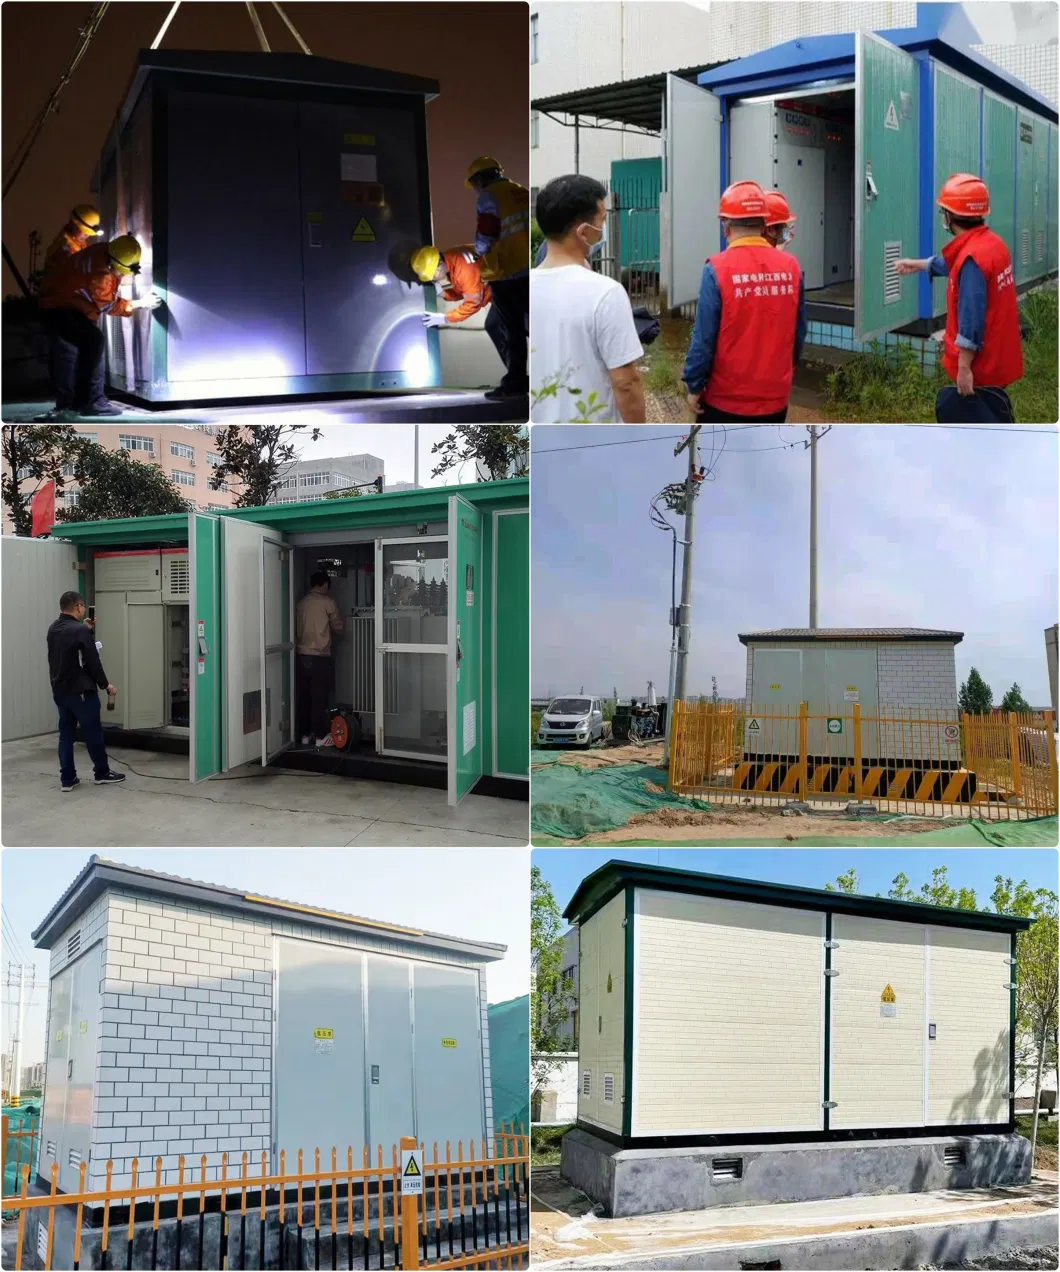 Ybf-35/0.4kv 630-2500kVA Special Box-Type Substation for Photovoltaic Wind Power Station Compact Substation